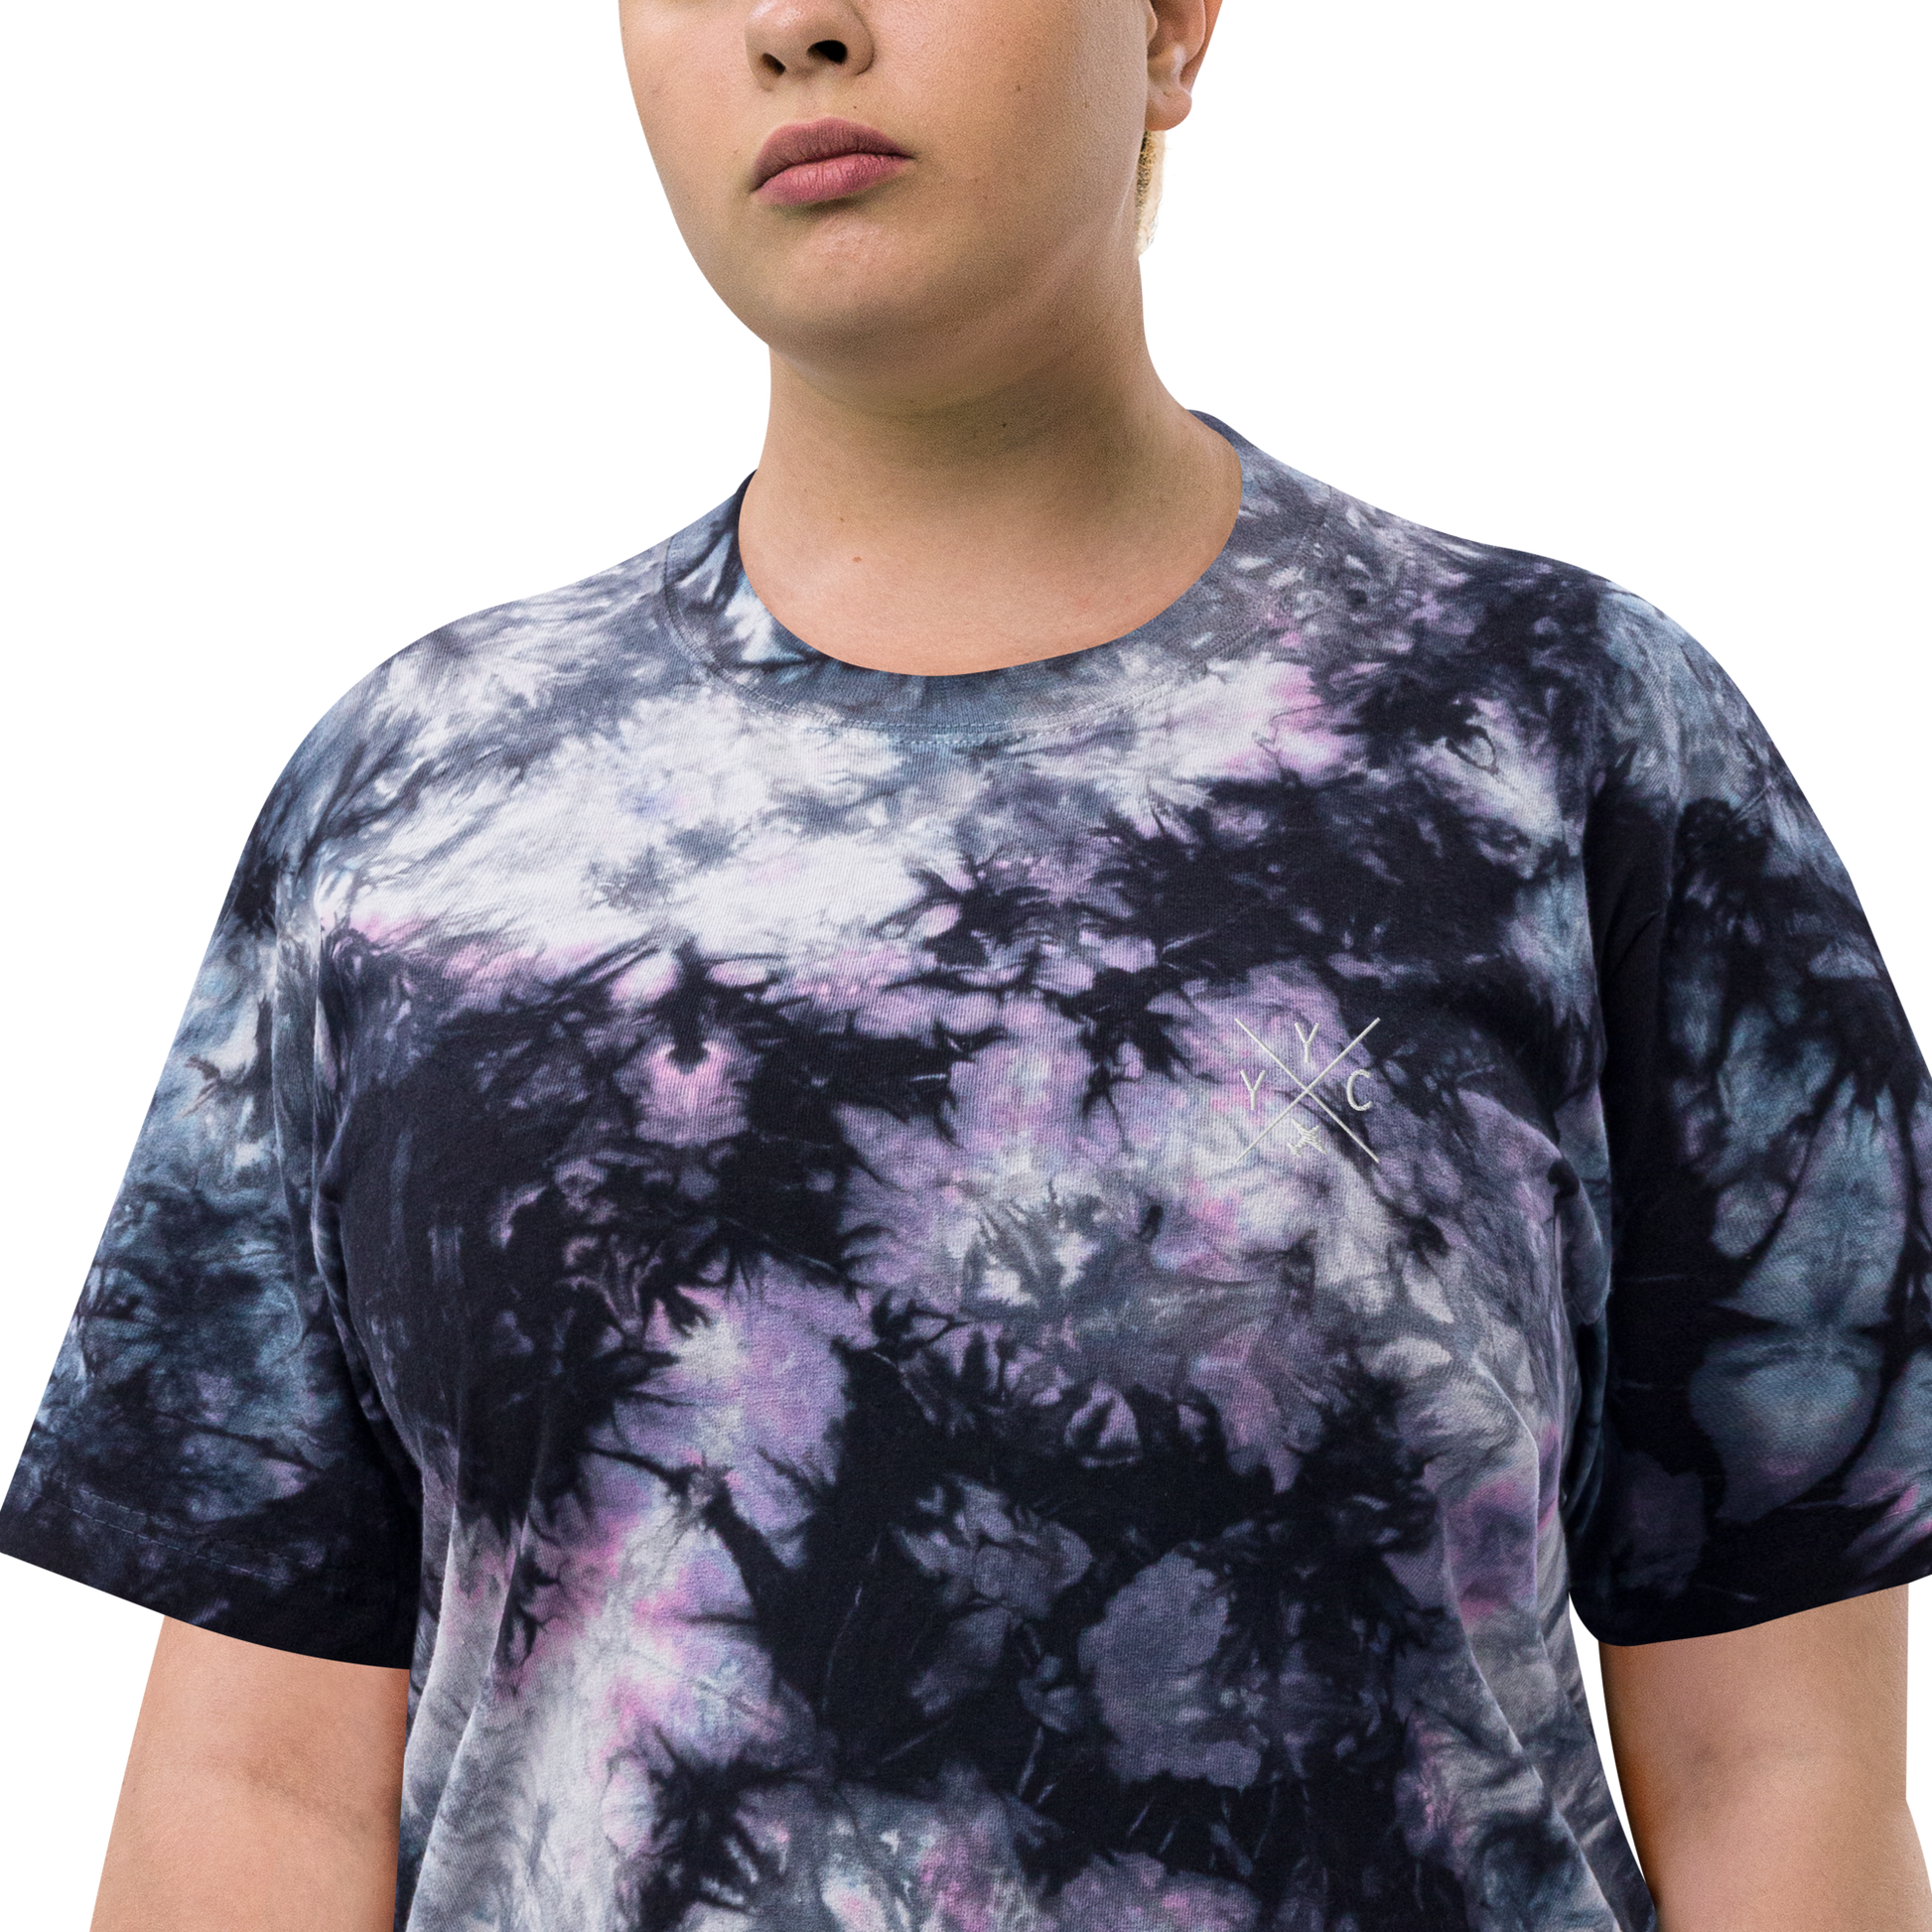 YHM Designs - YYC Calgary Oversized Tie-Dye T-Shirt - Crossed-X Design with Airport Code and Vintage Propliner - White Embroidery - Image 07